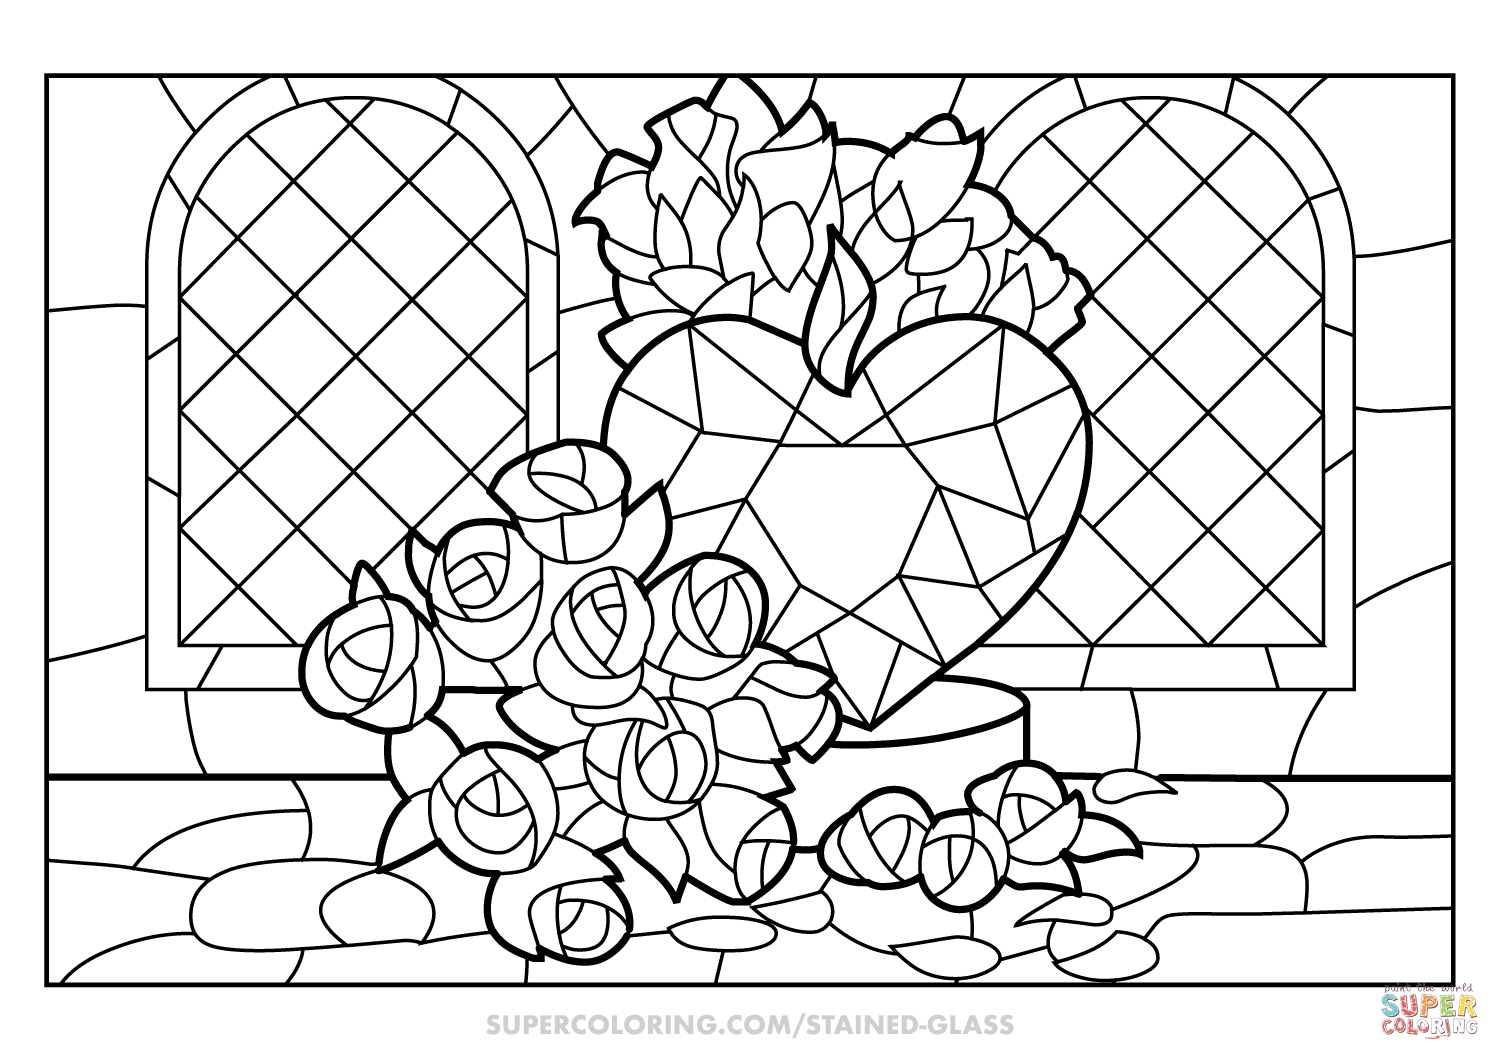 Roses and heart stained glass coloring page free printable coloring pages